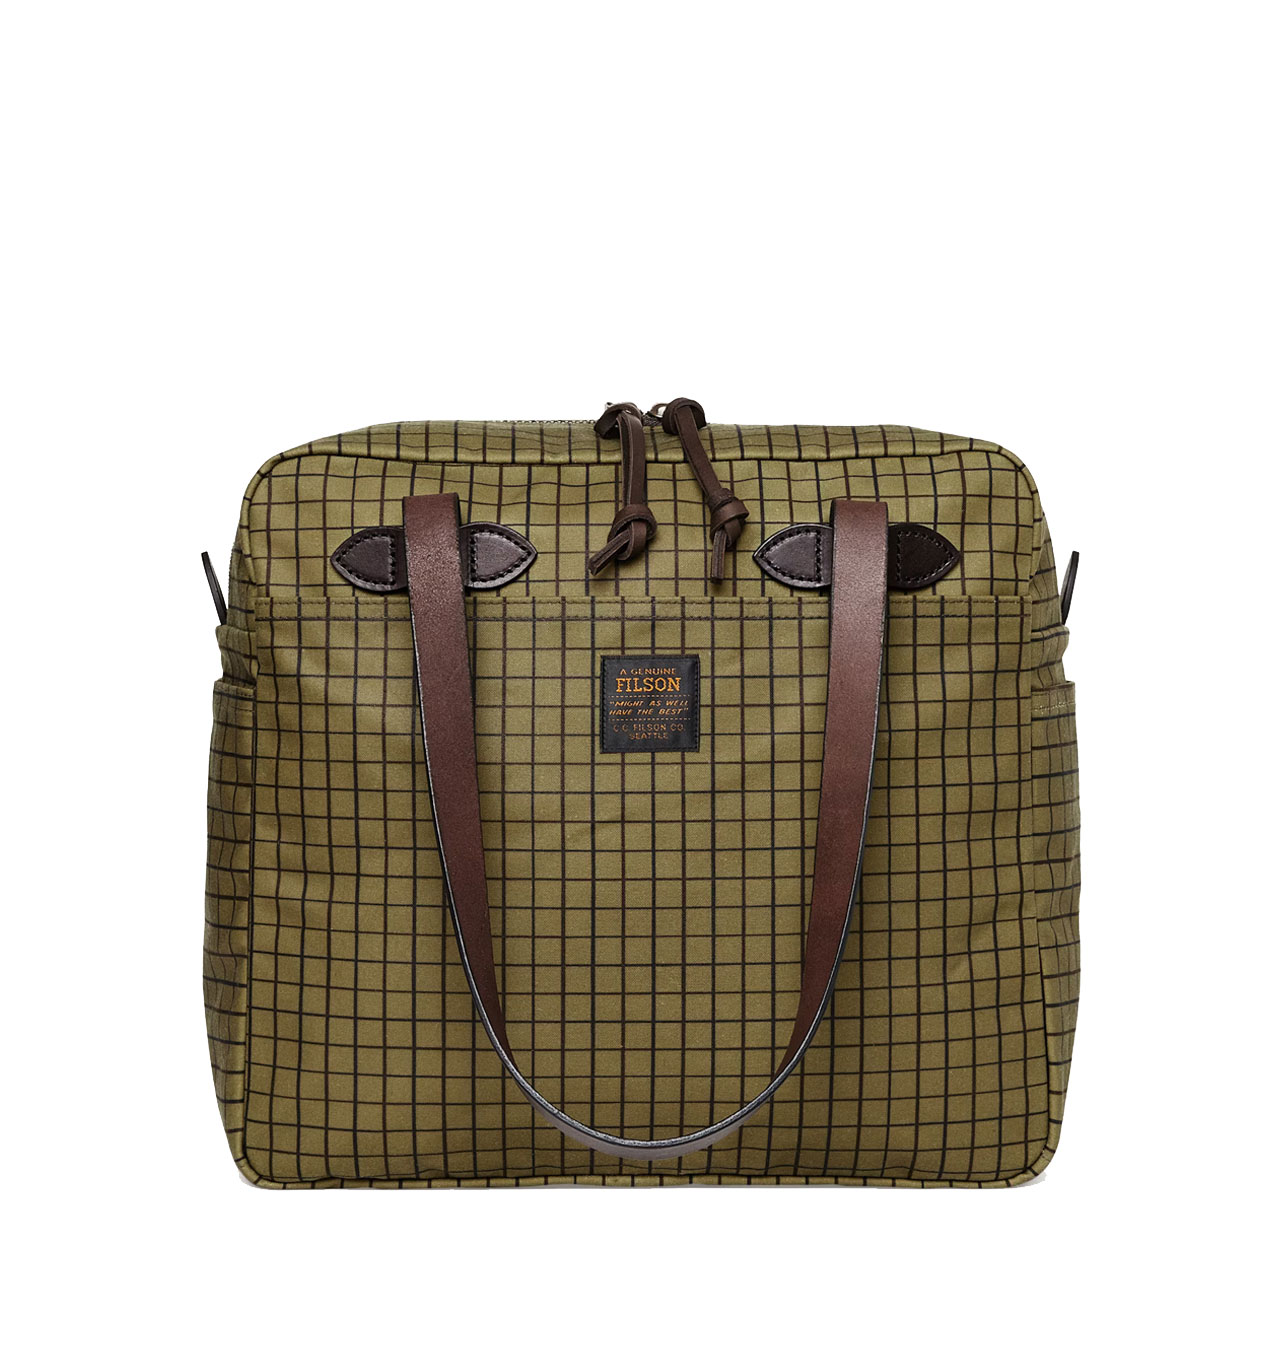 Filson---Tin-Cloth-Tote-Bag-with-Zipper---Flyway-Green2-1